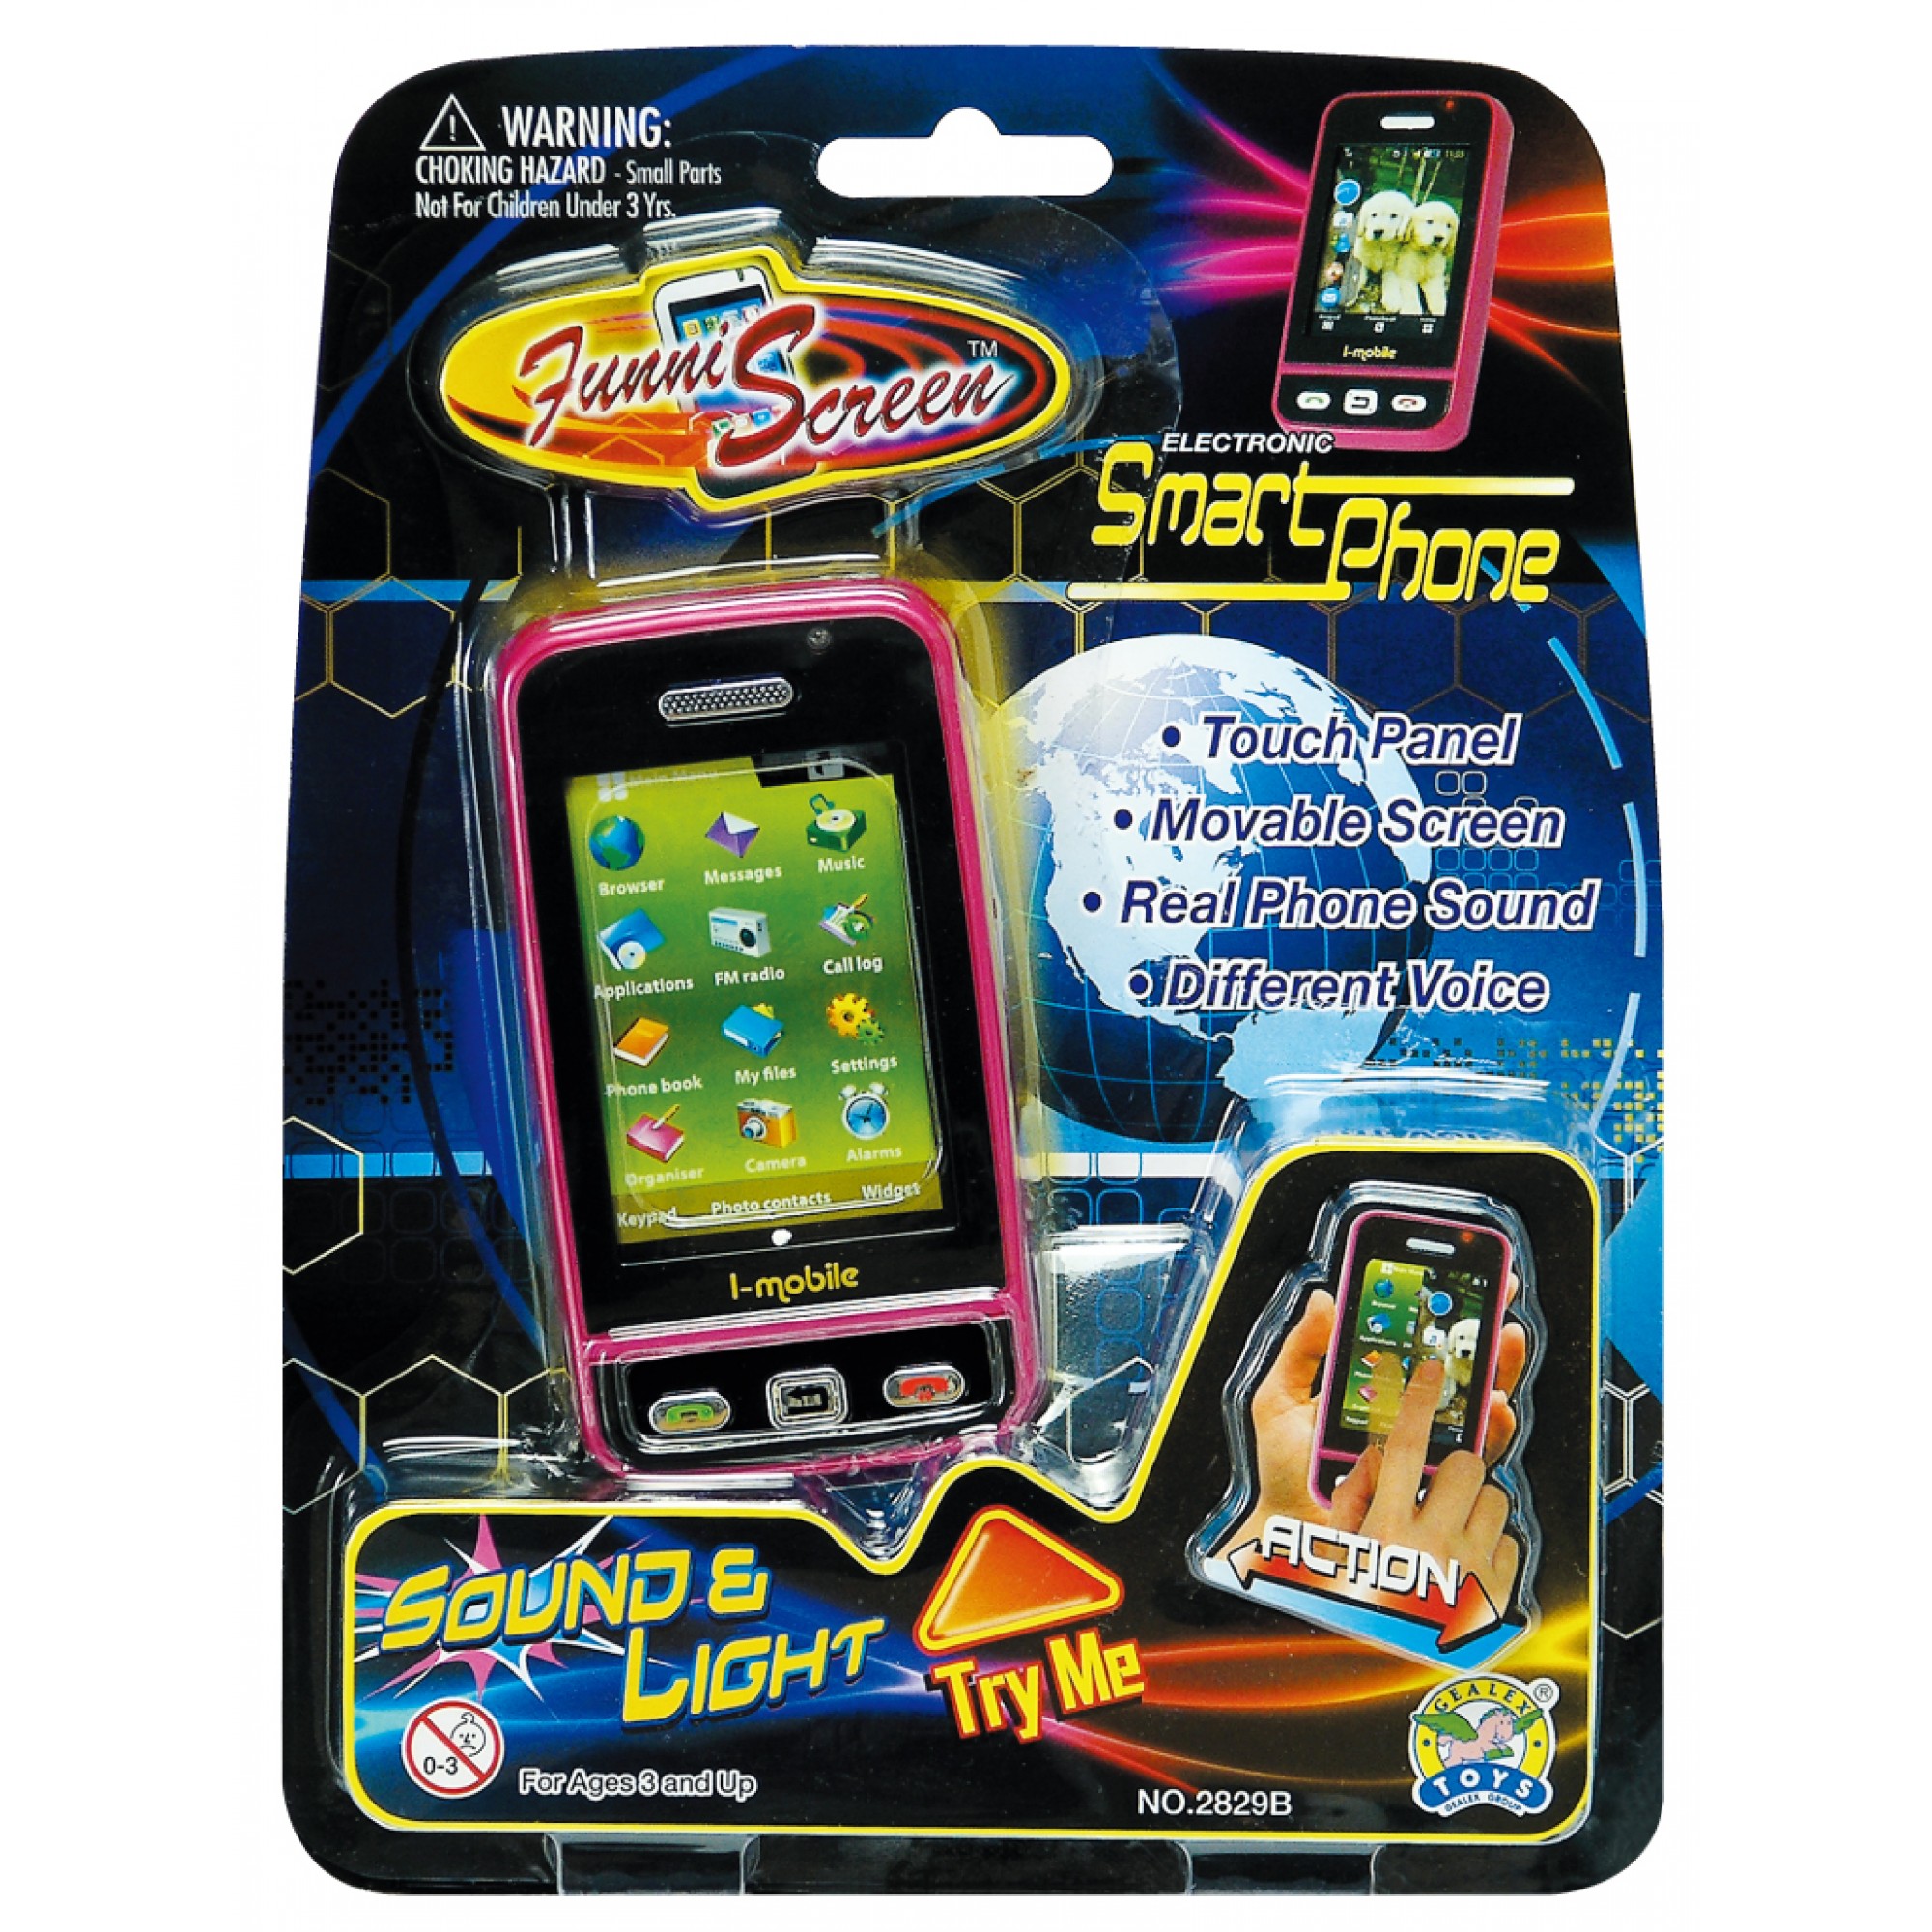 Touch Screen Mobile Phone (S)